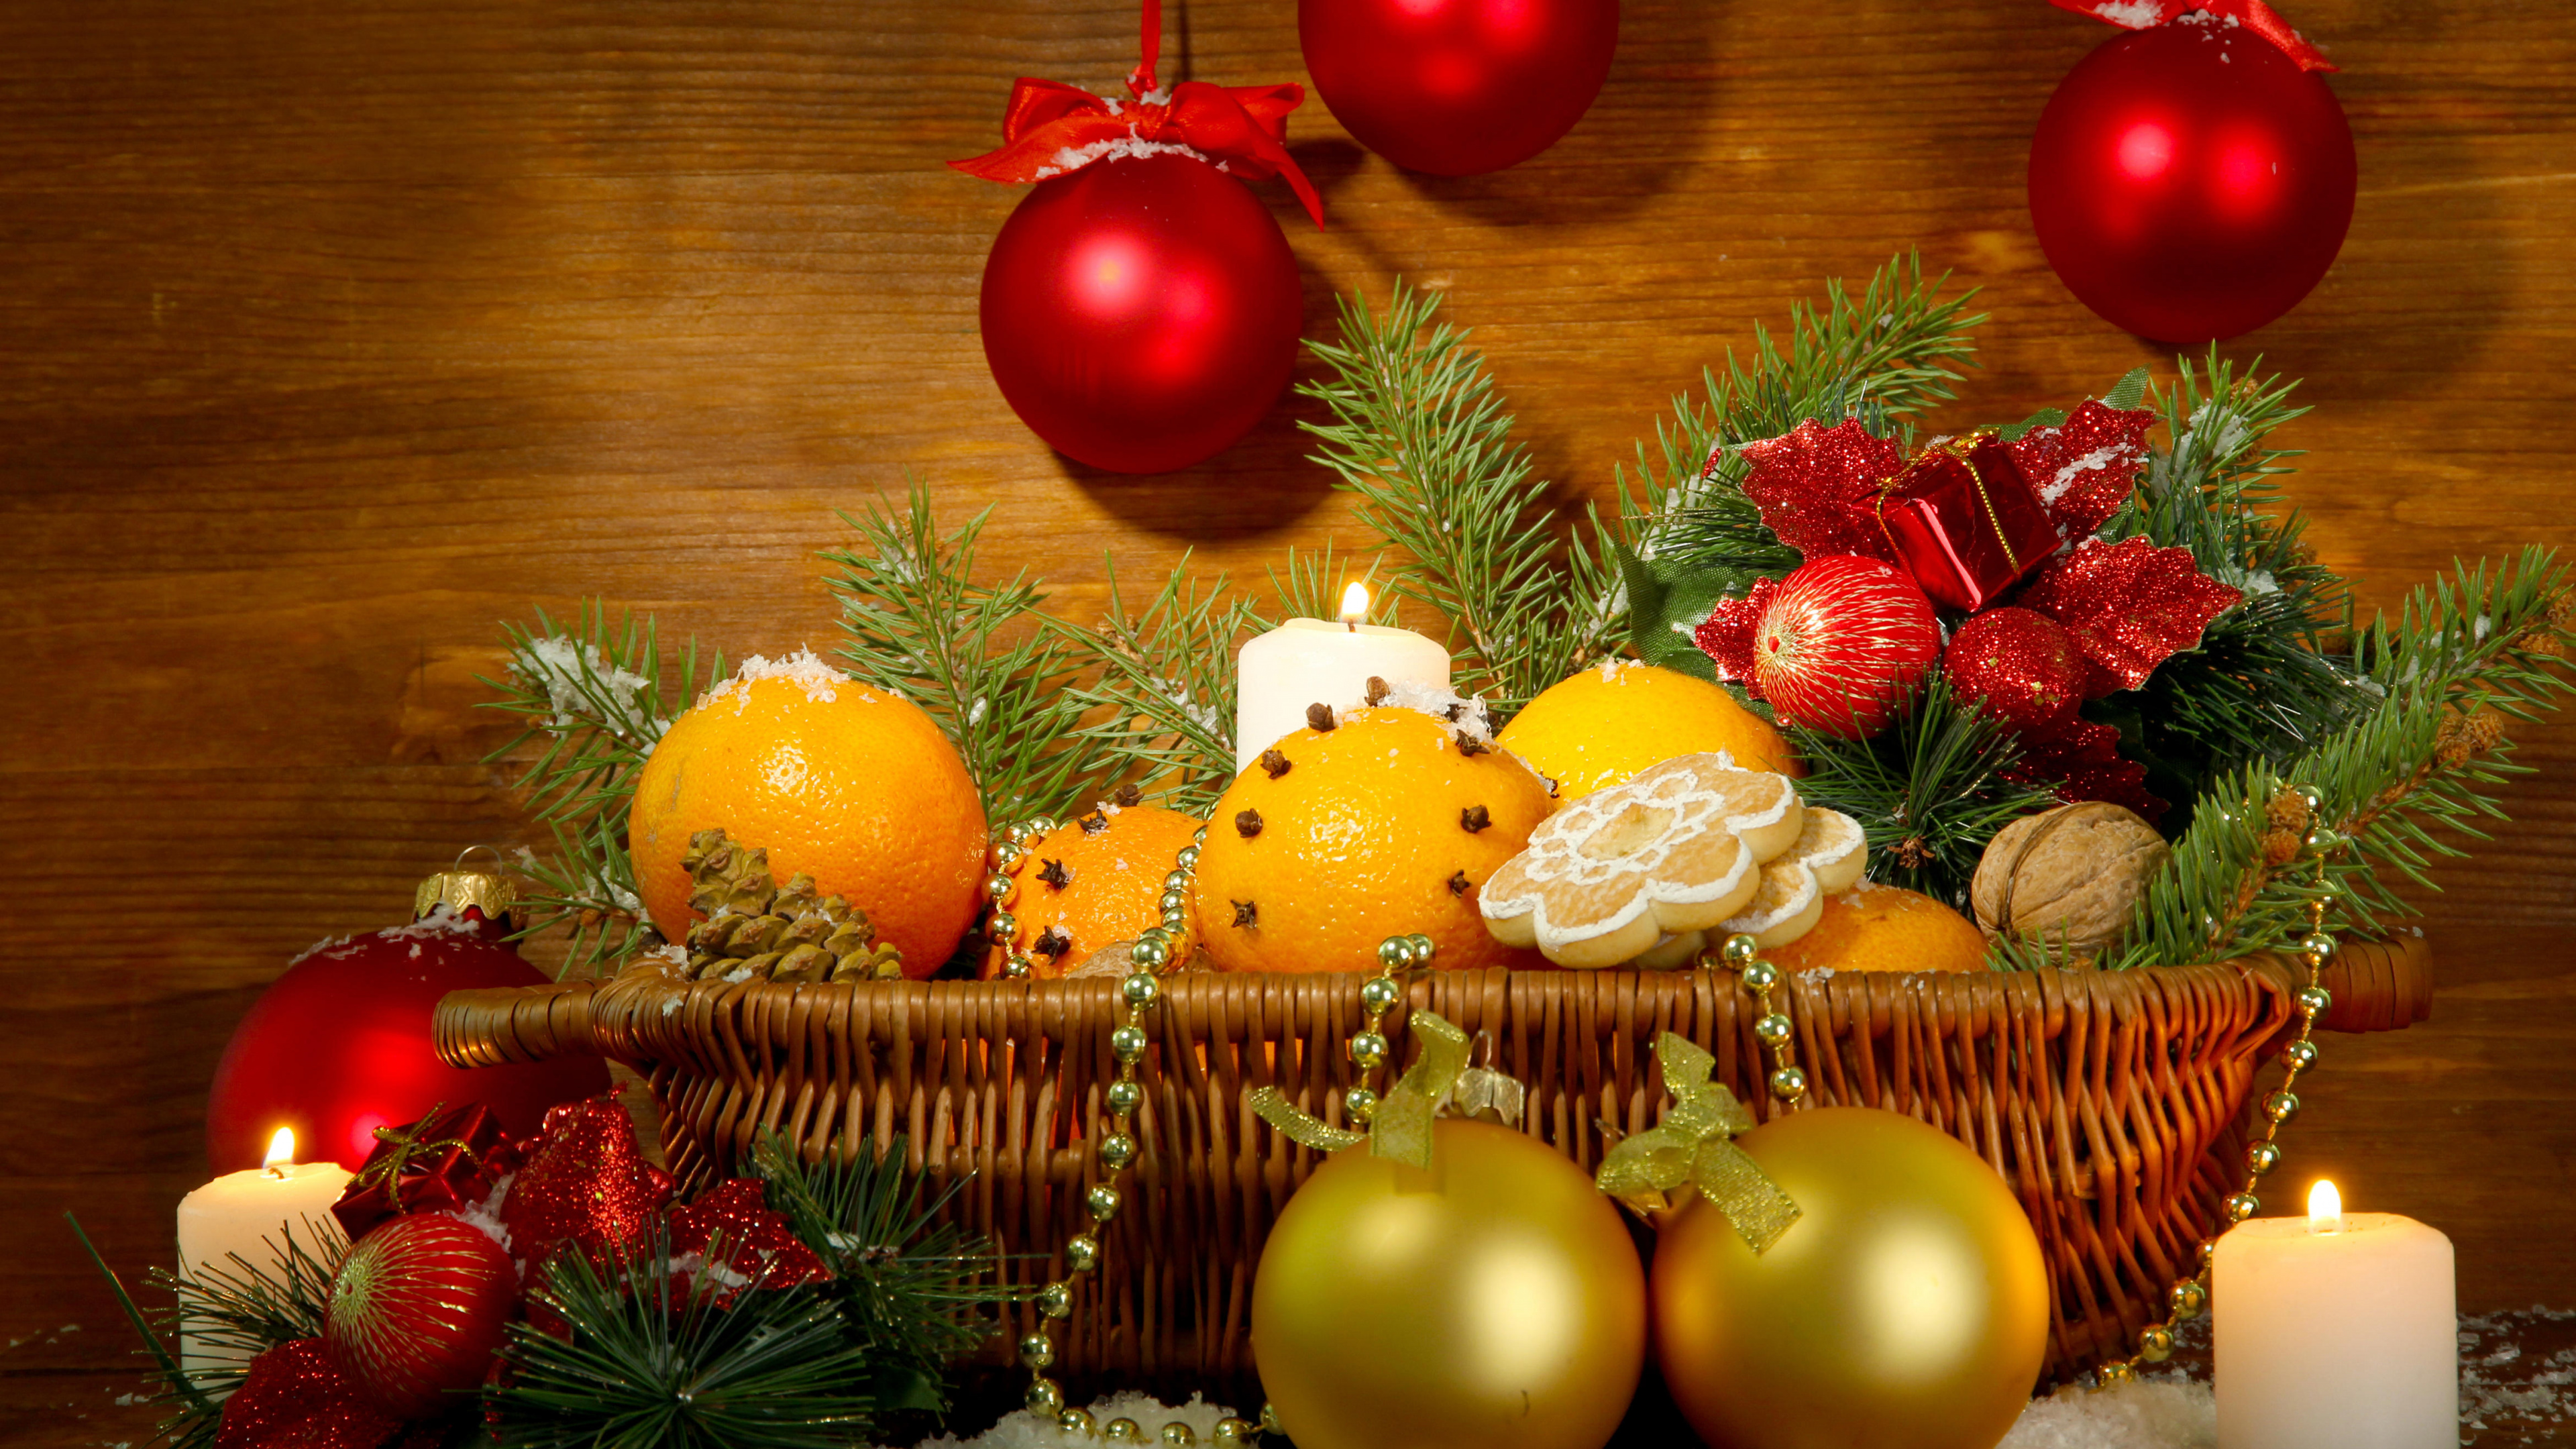 New Year, Christmas Day, Christmas Ornament, Christmas Decoration, Still Life. Wallpaper in 3840x2160 Resolution